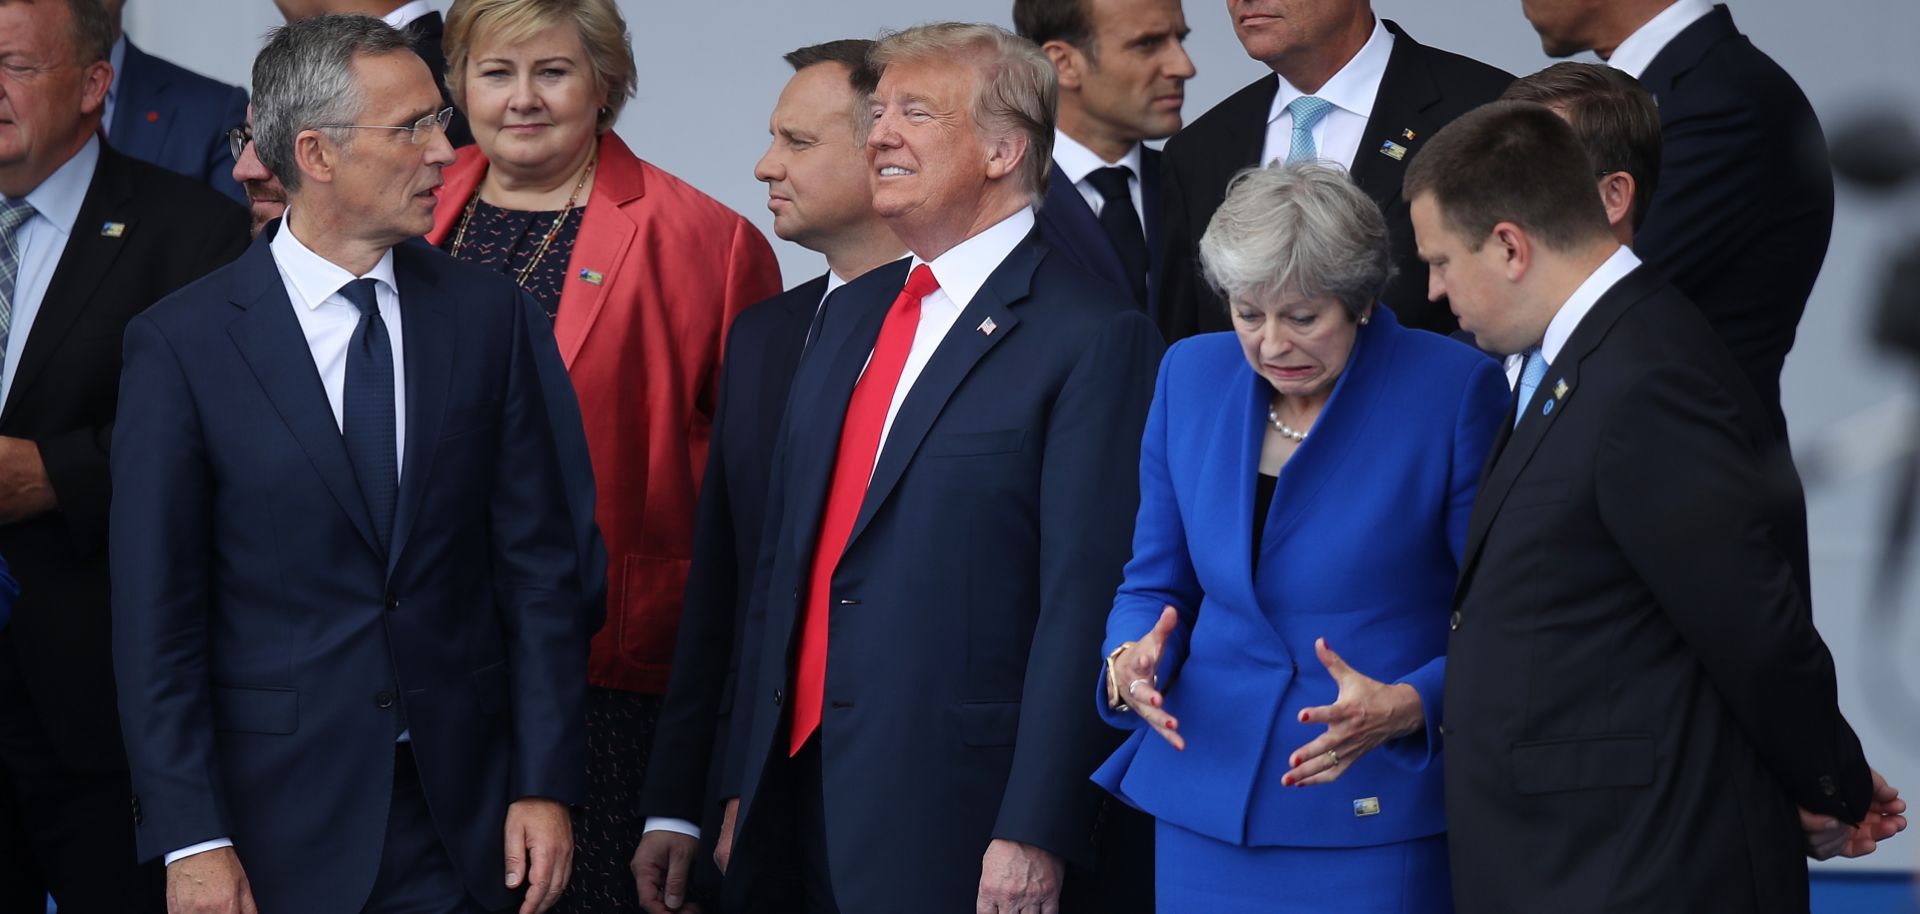 NATO Secretary-General Jens Stoltenberg (L), U.S. President Donald Trump (C) and British Prime Minister Theresa May (R) mingle with other NATO representatives at the opening ceremony for the military bloc's annual summit in Brussels on July 11, 2018.